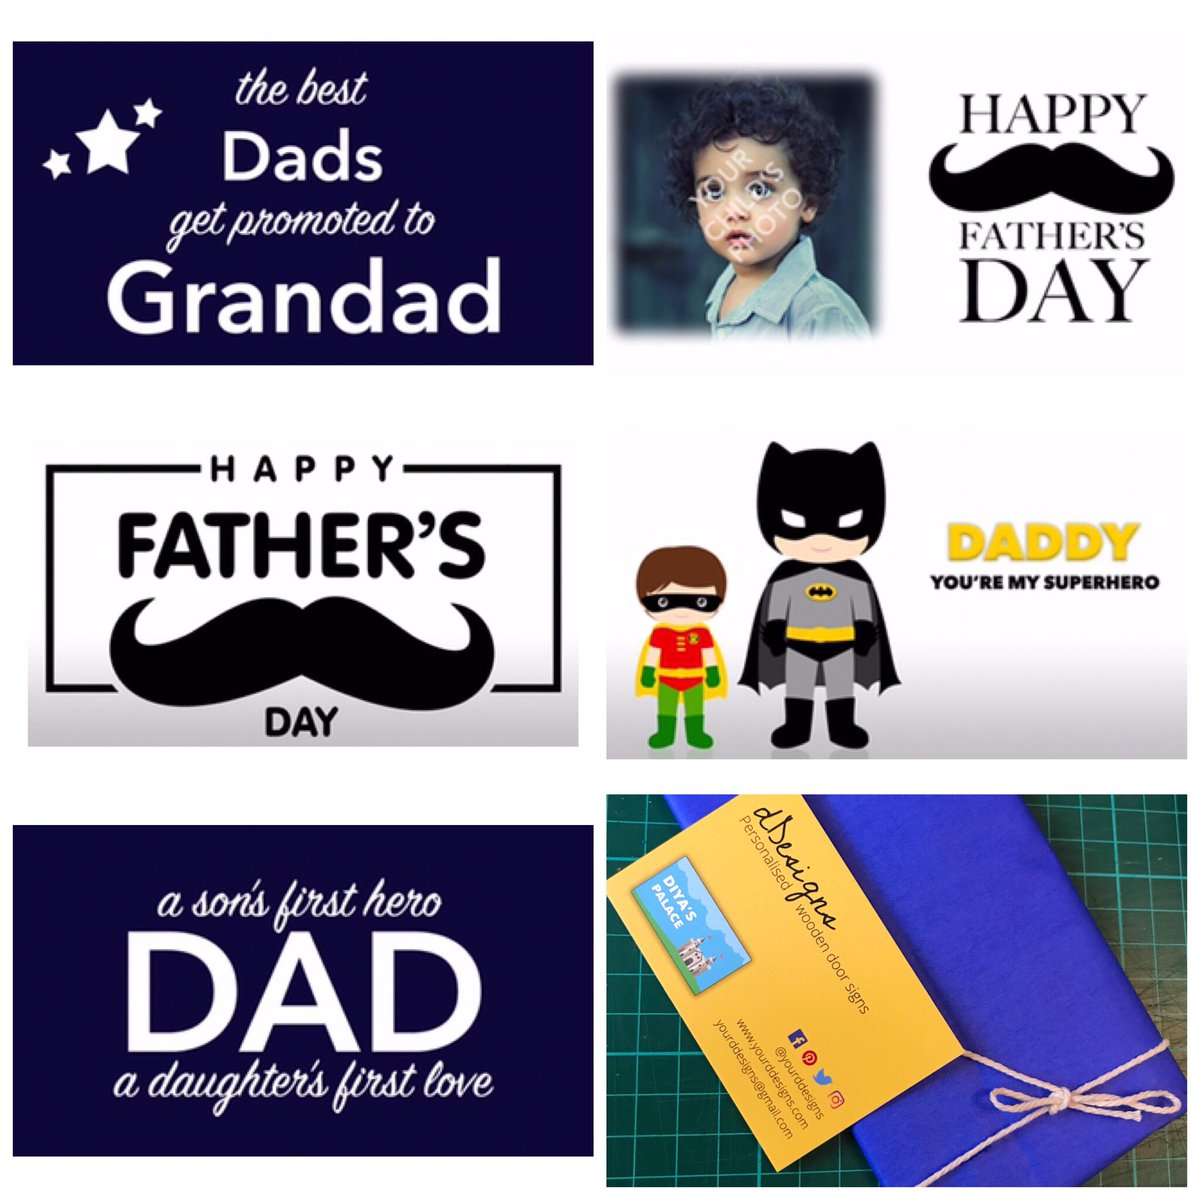 Stuck for ideas for Father’s Day? How about one of our signs or fridge magnets? Prices start at £4 including P&P 

#fathersday #fathersdaygifts #giftsfordads #giftsforfathers #giftaforgrandad #giftsfornewdads #giftsfornewparents #dadgifts #dadpresents #daddy #papa #uniquegifts